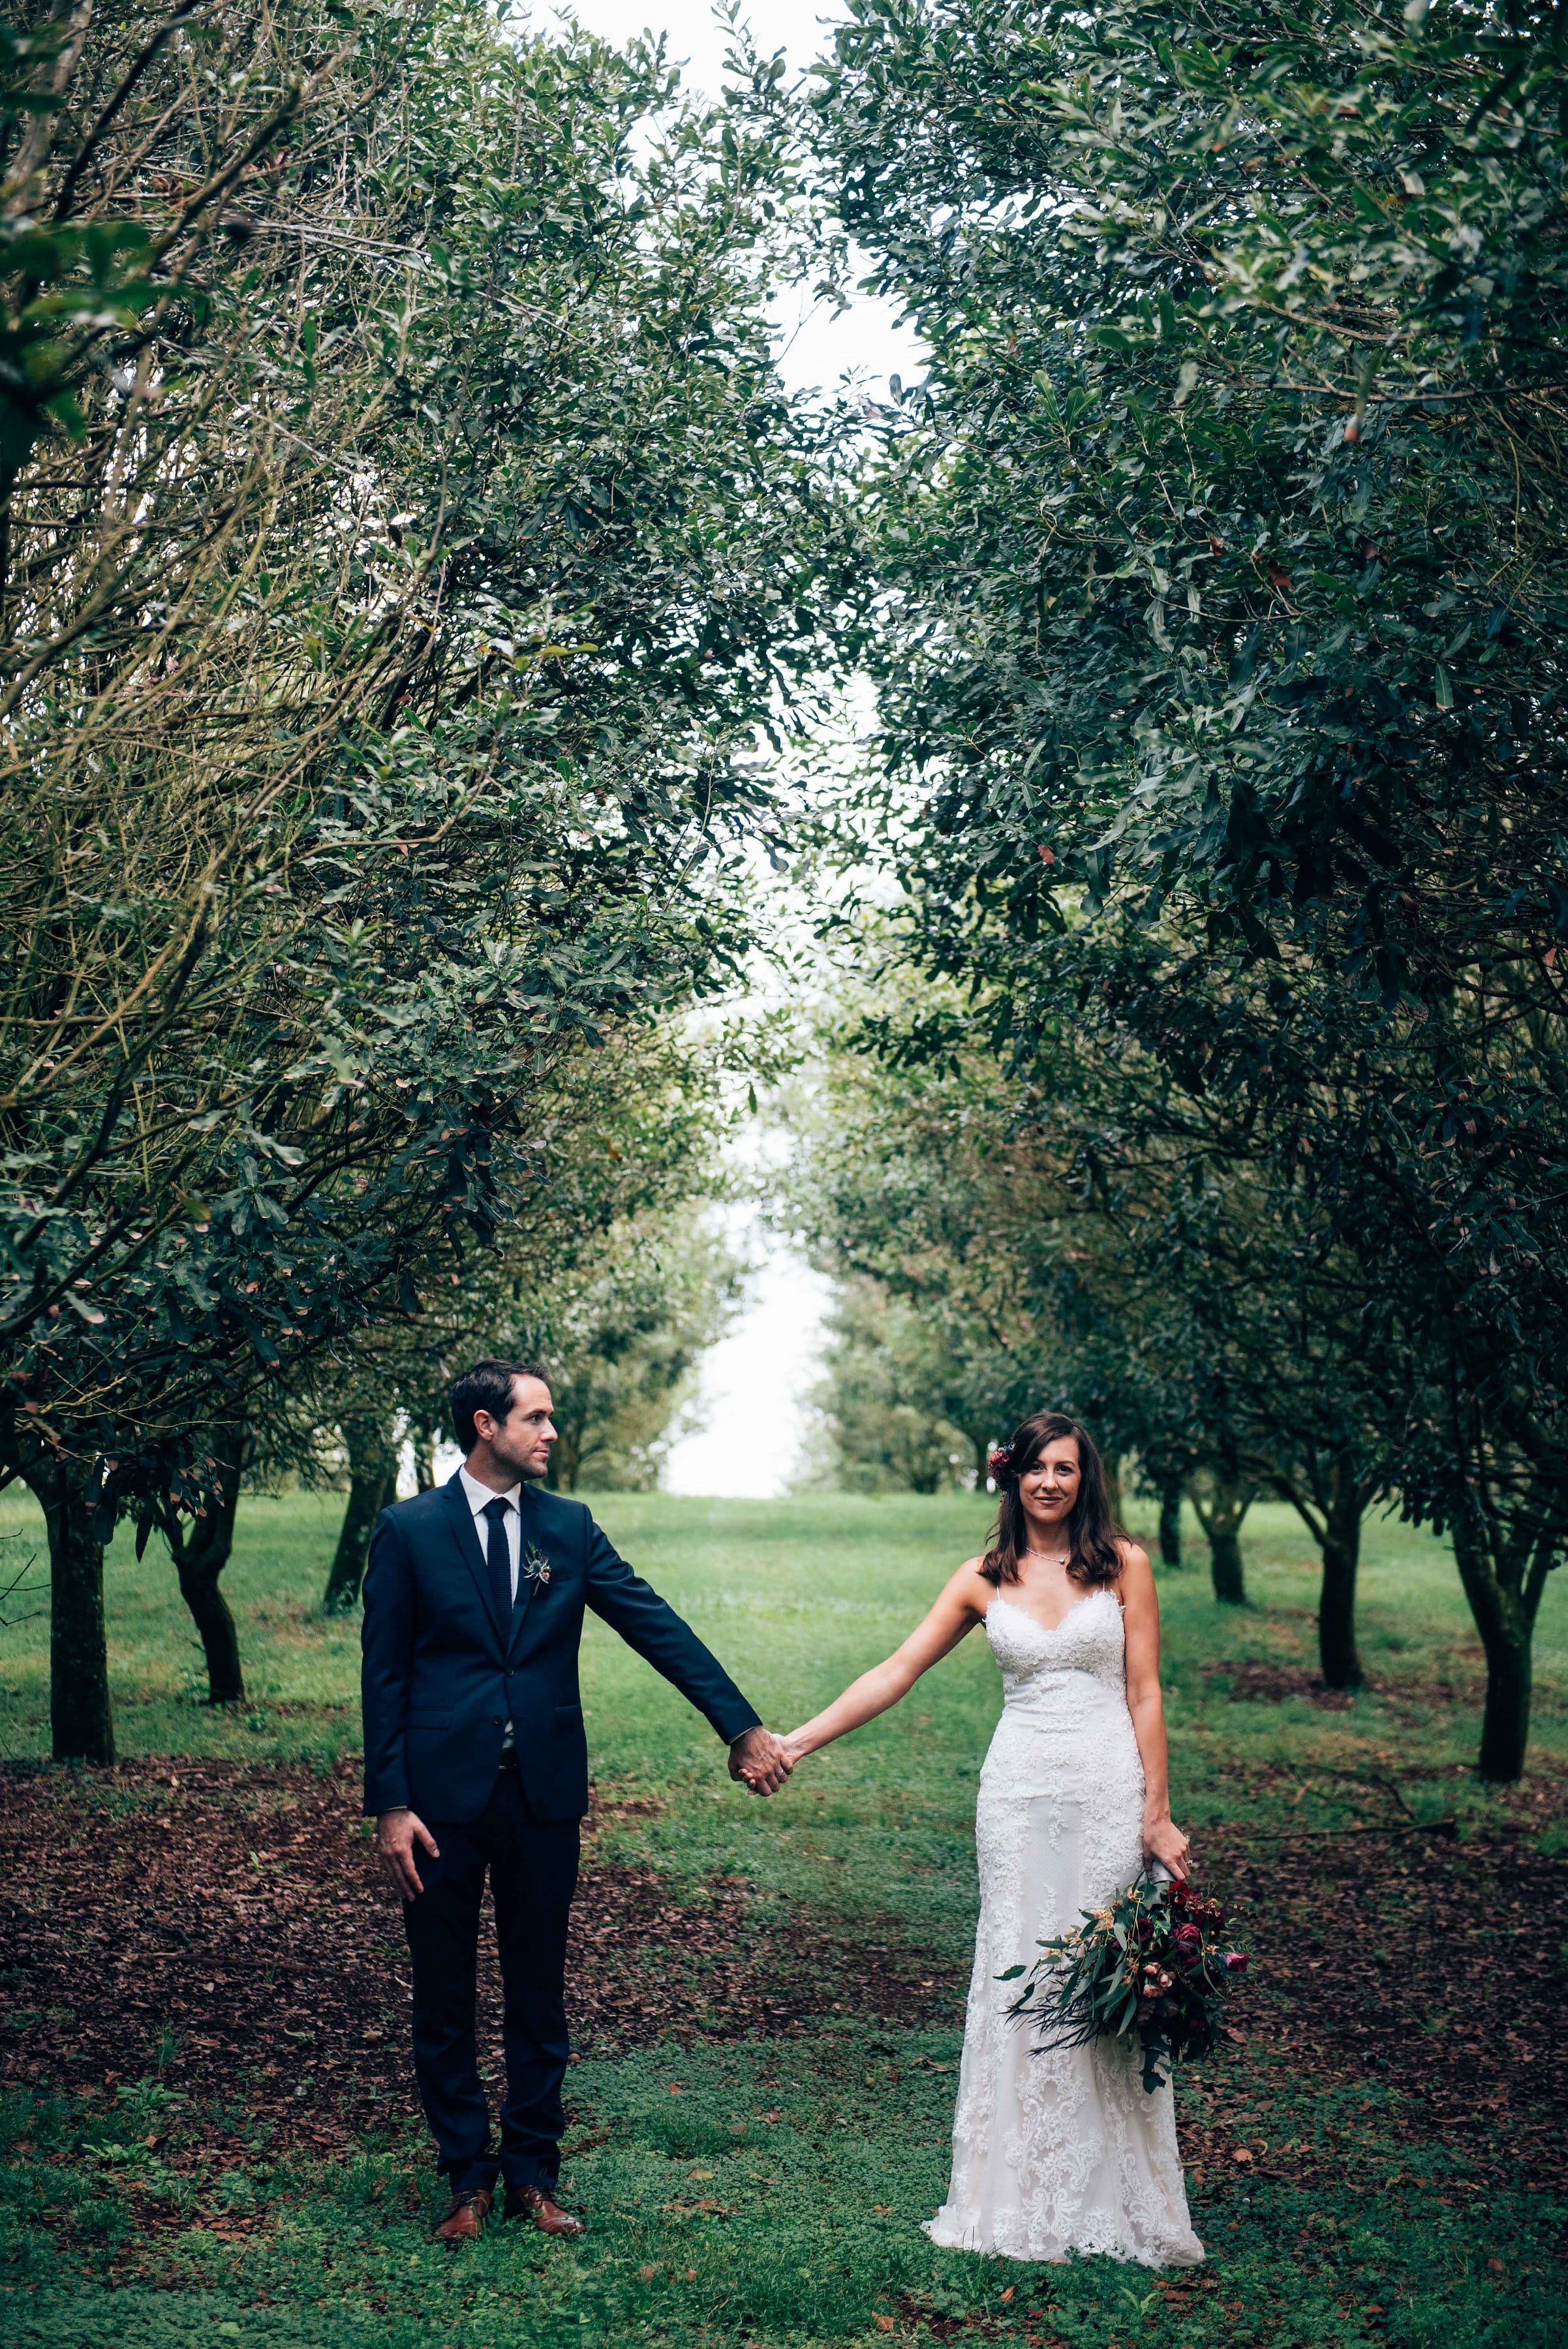 Effortlessly sexy outdoor wedding Sarah and Philip - Bride is wearing Mattea by Sottero and Midgley